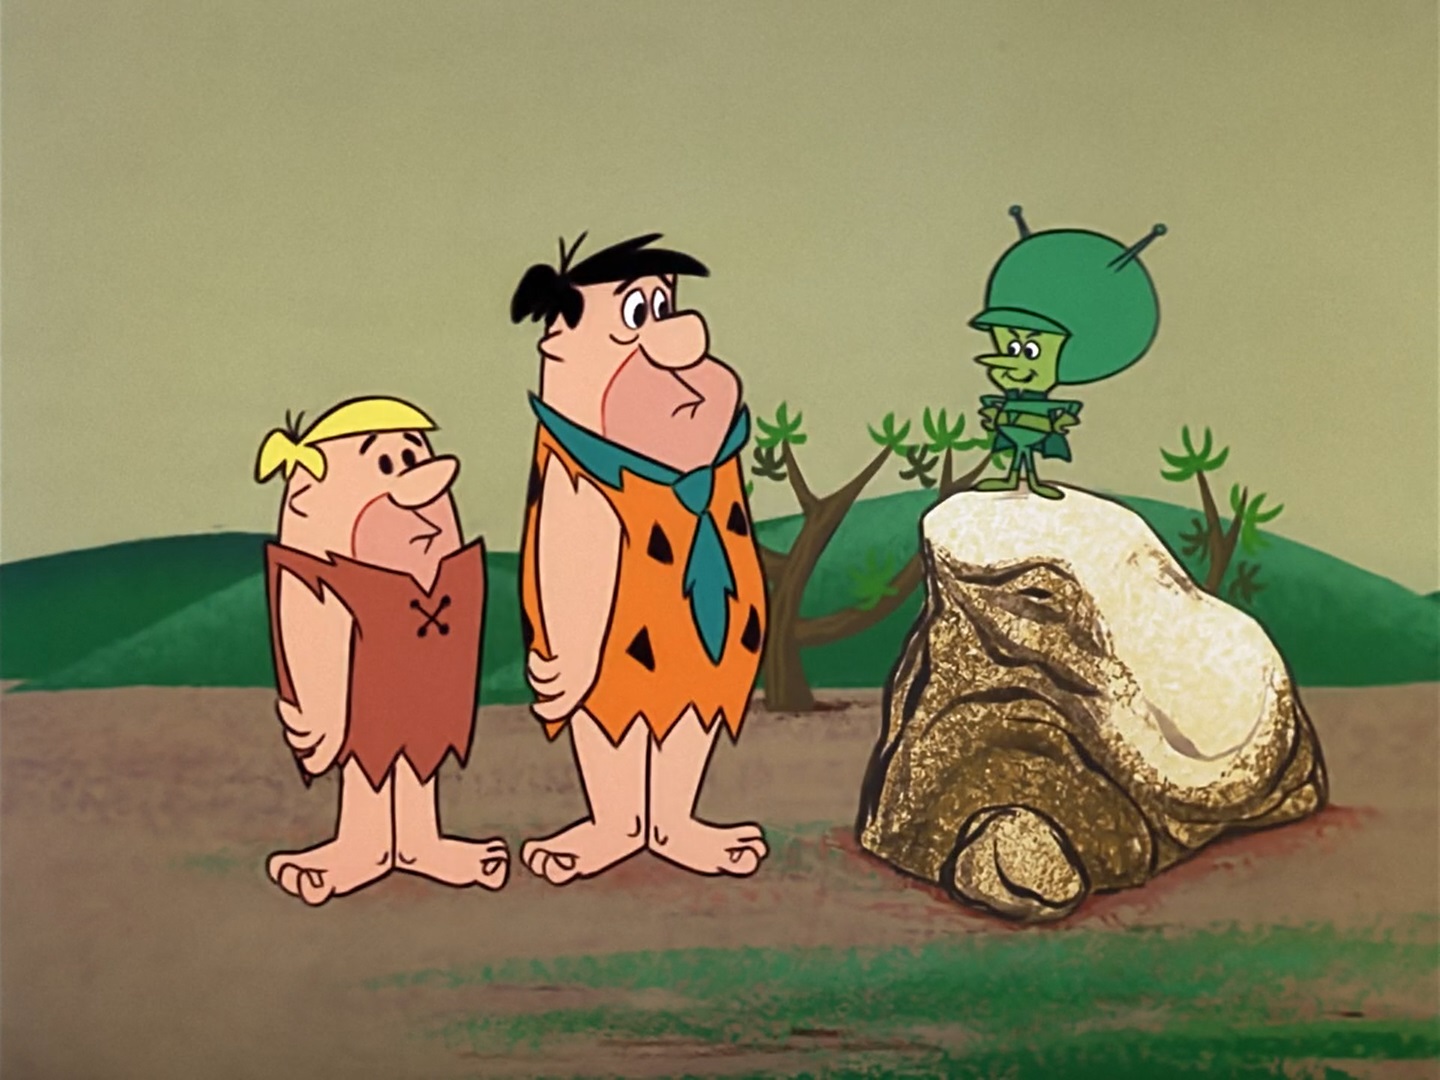 https://static.wikia.nocookie.net/flinstones/images/e/e6/The_Flintstones_-_The_Great_Gazoo_-_Fred%2C_Barney_and_the_Great_Gazoo.jpg/revision/latest?cb=20211119051308